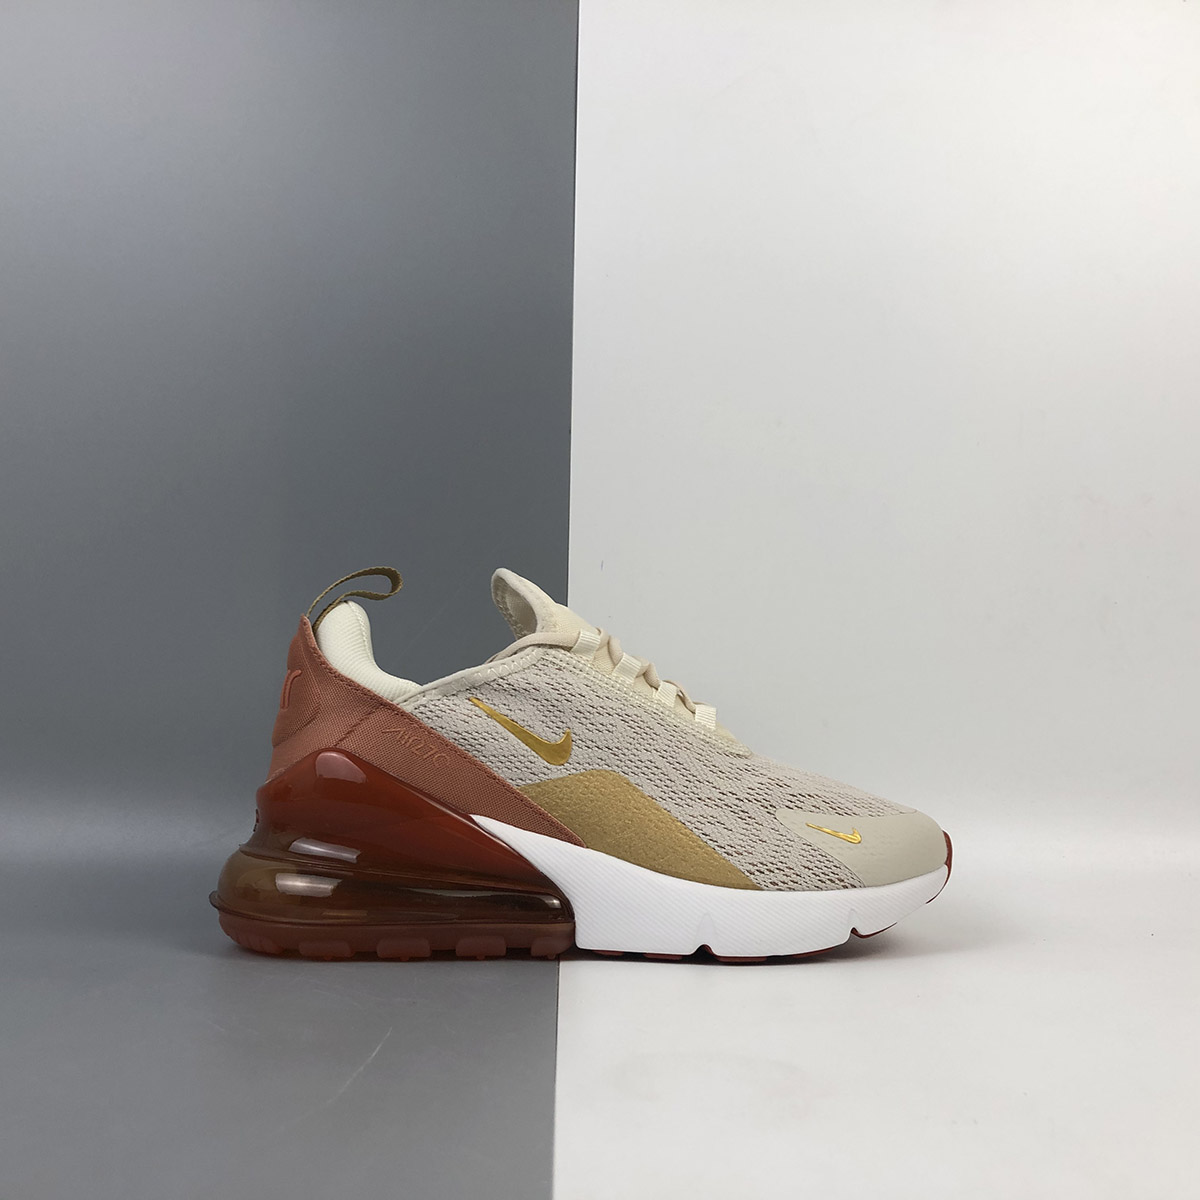 air max 270s on sale